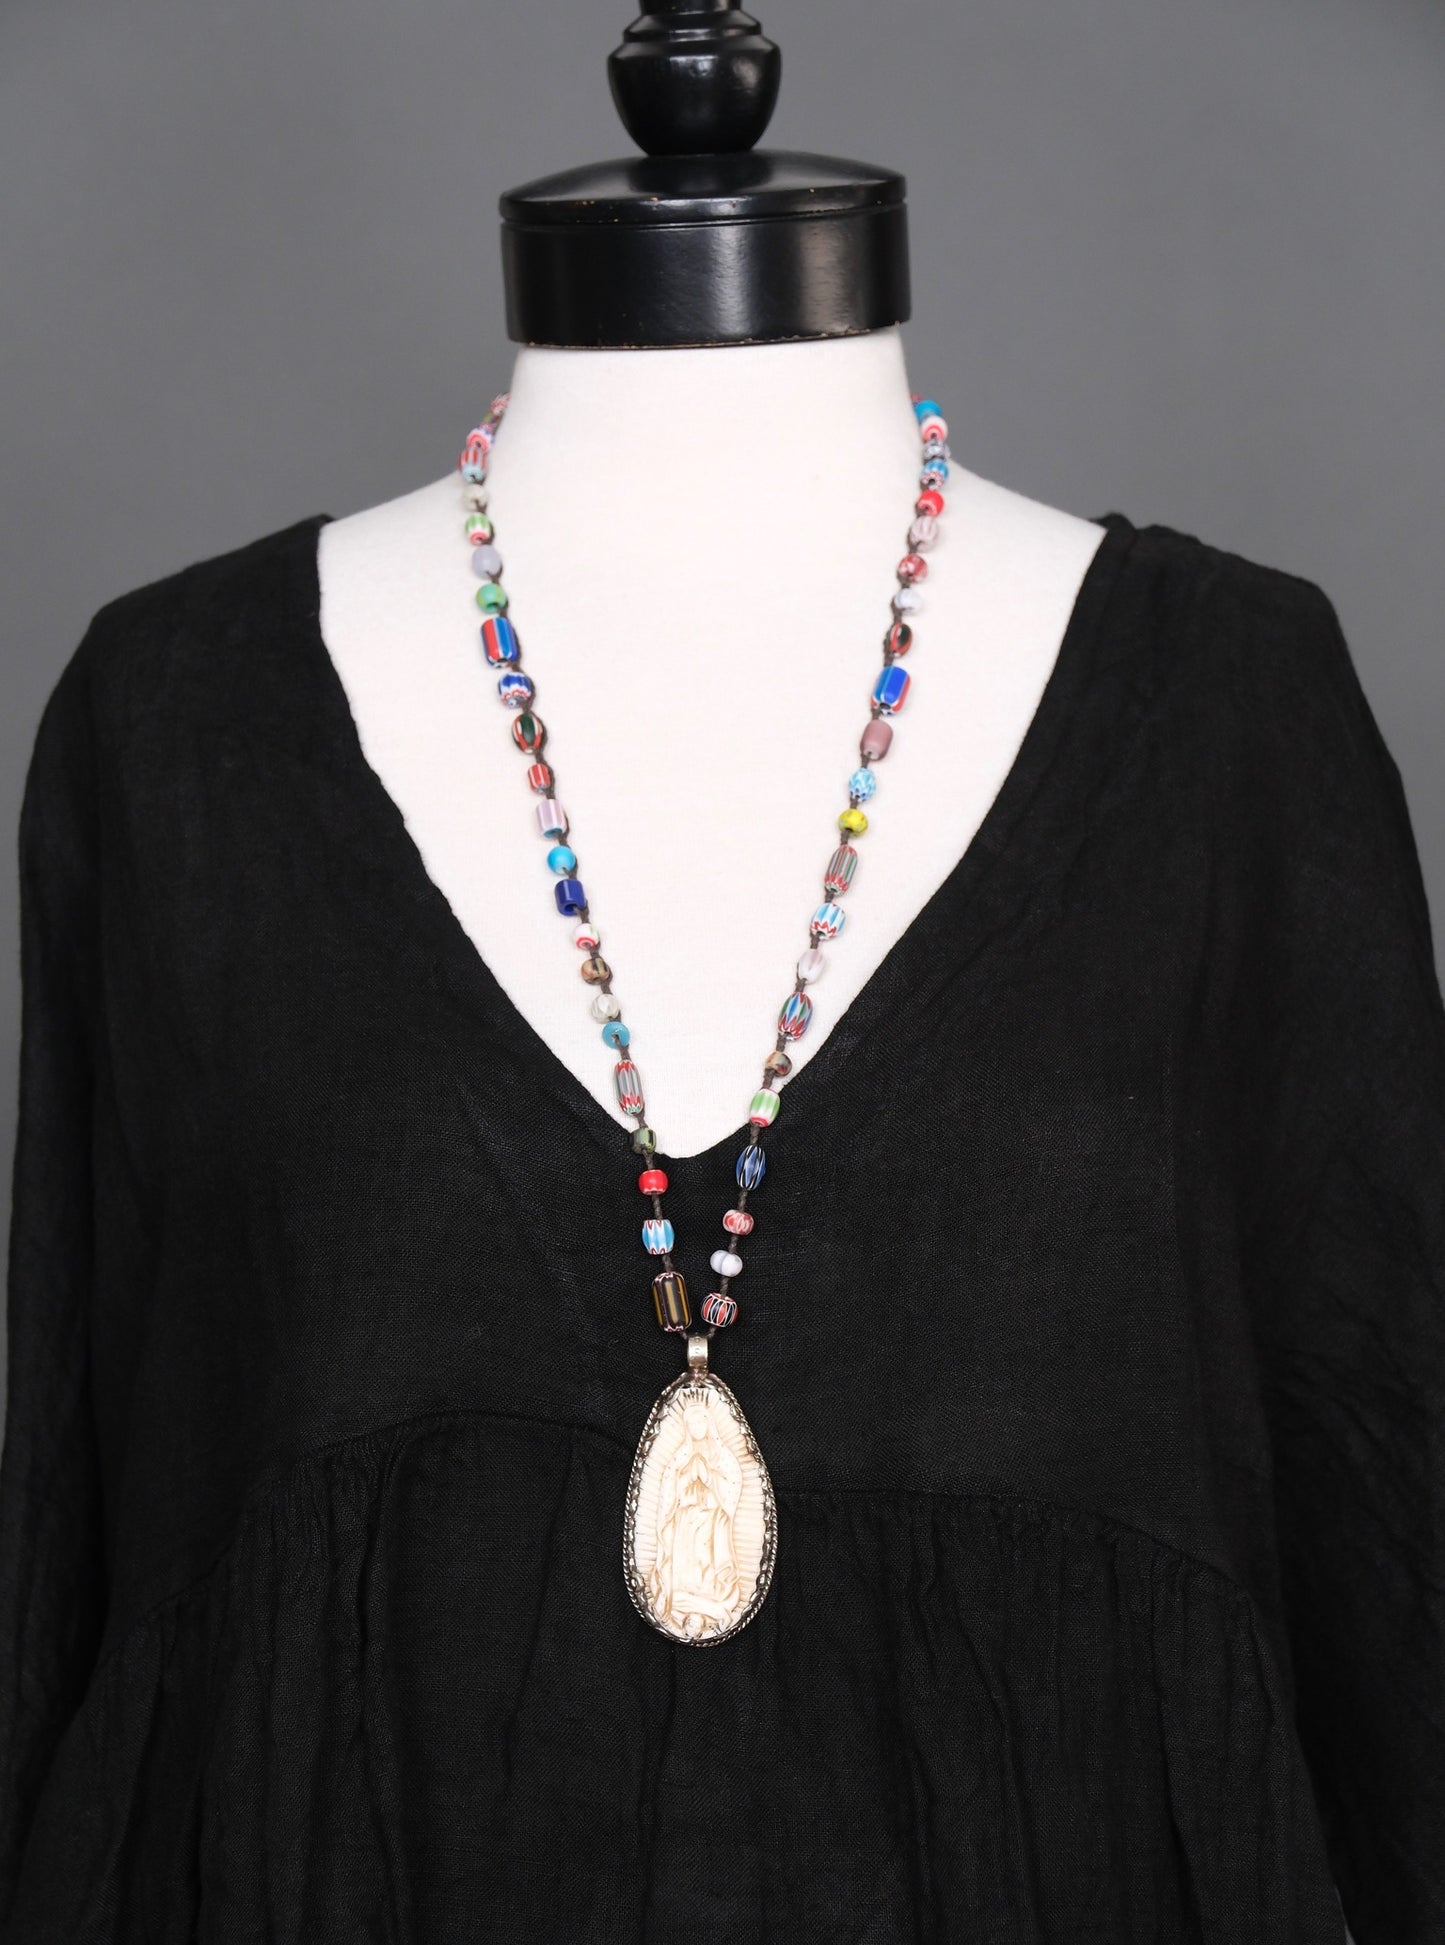 Guadalupe Necklace with African Beads #101